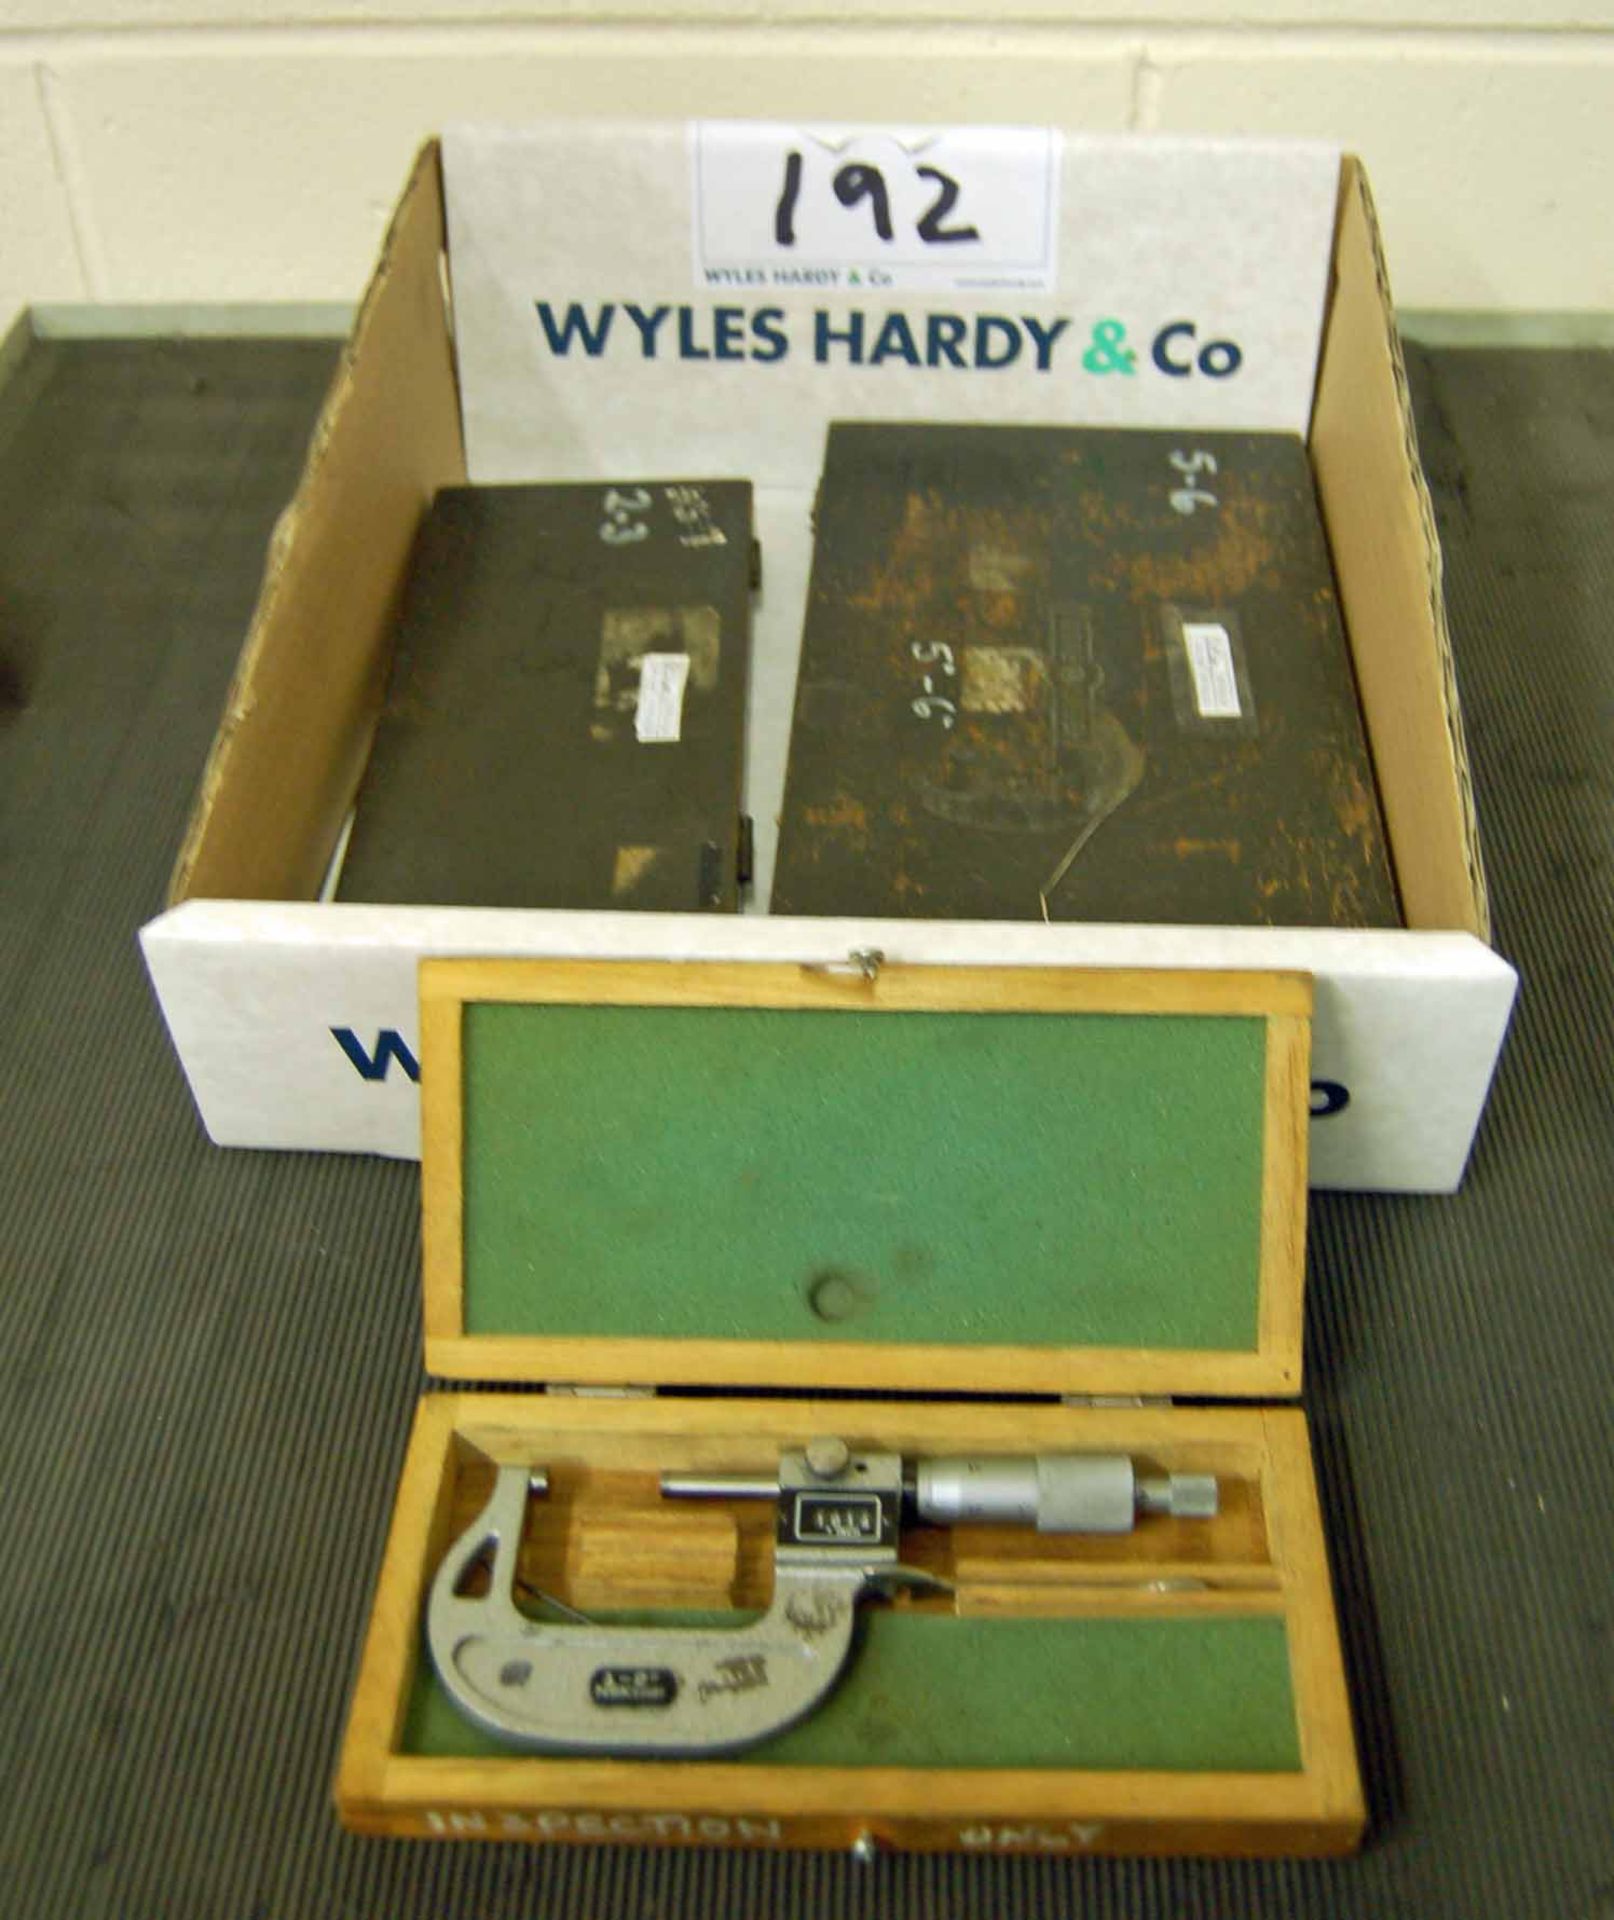 Three External Micrometers From 1-6 inches